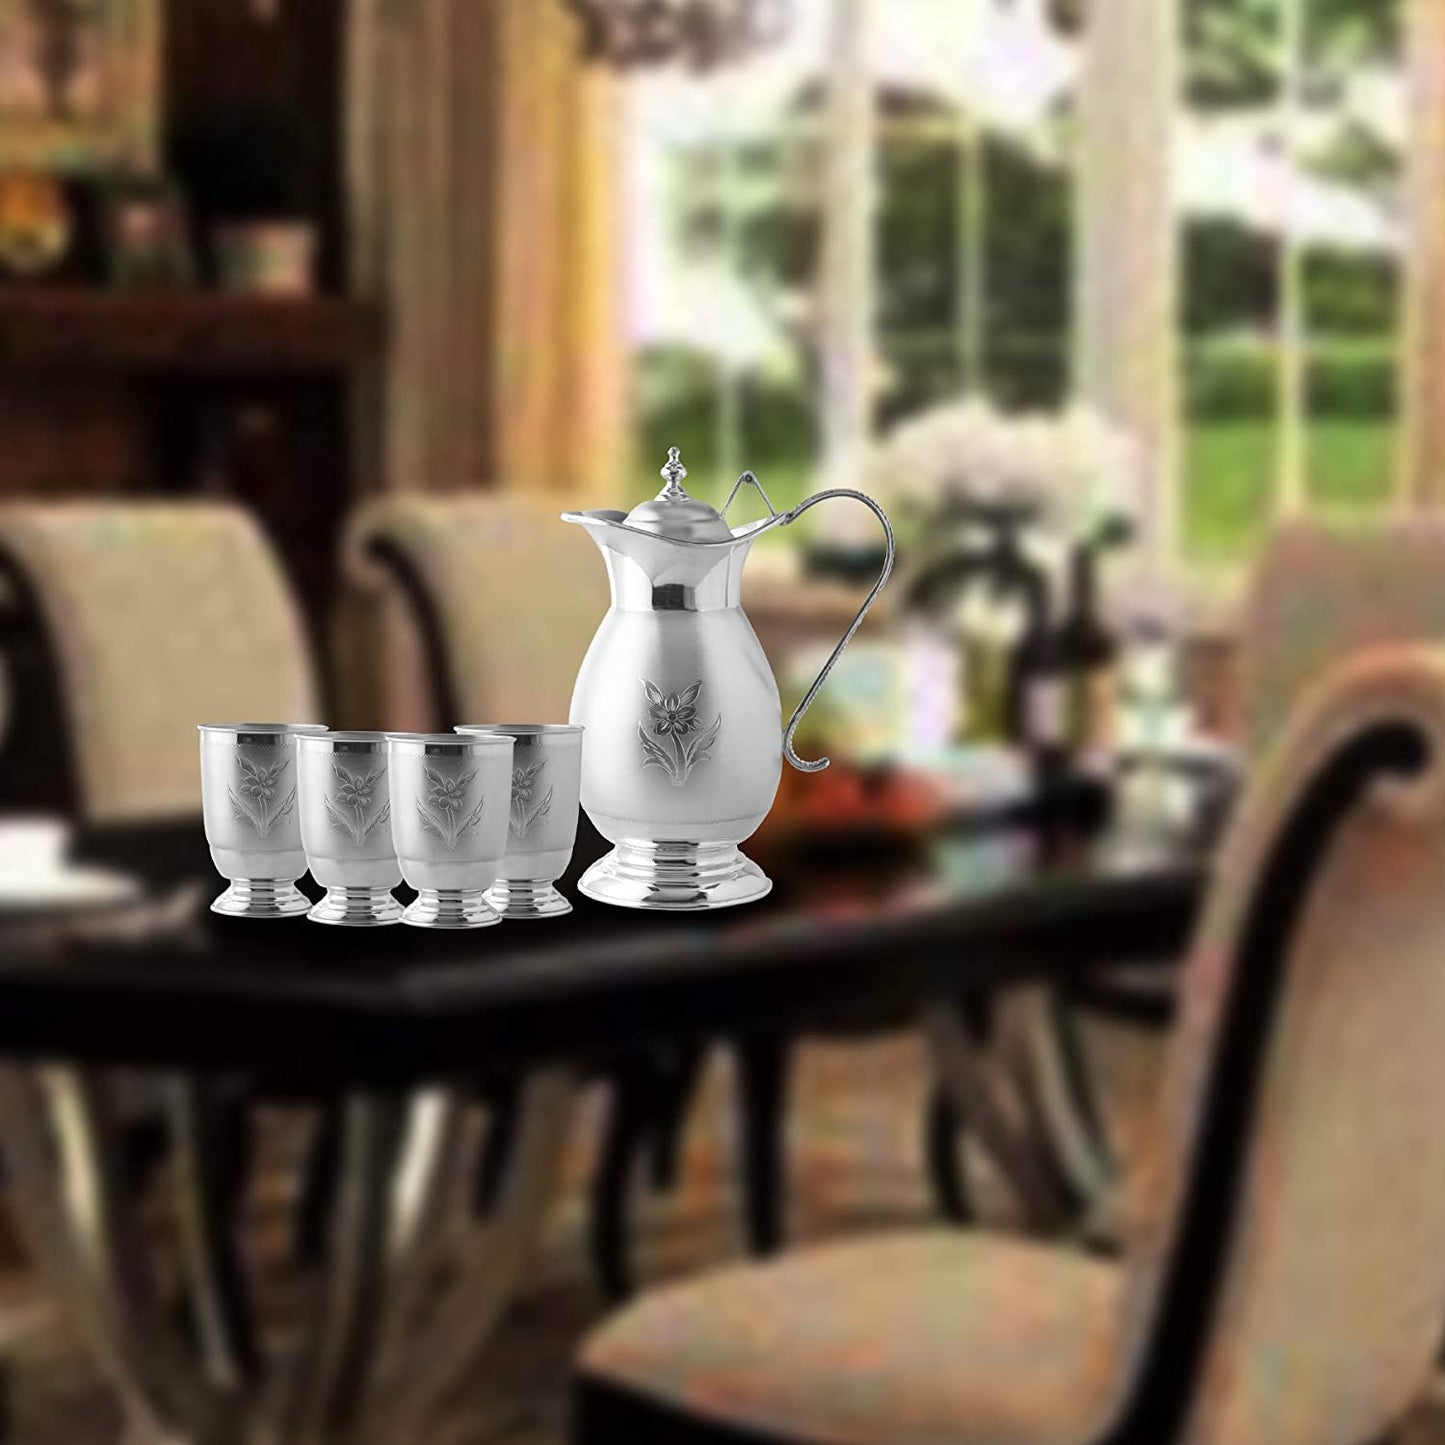 CaratCafe Pure Silver 925 Jug Glass Set for Everyday Use